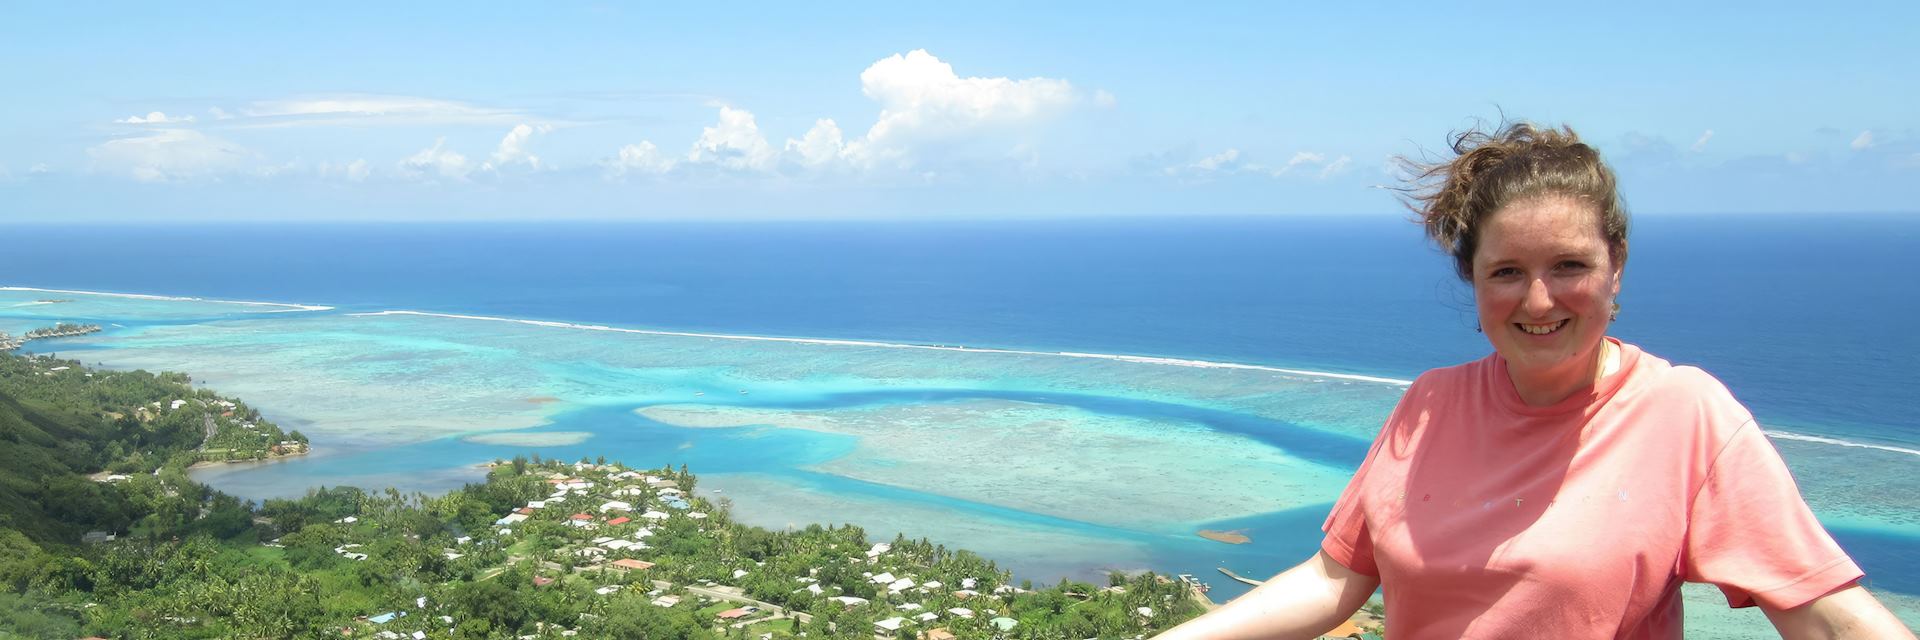 Annabel on top of Magic Mountain looking at the lagoons of Mo'orea, French Polynesia